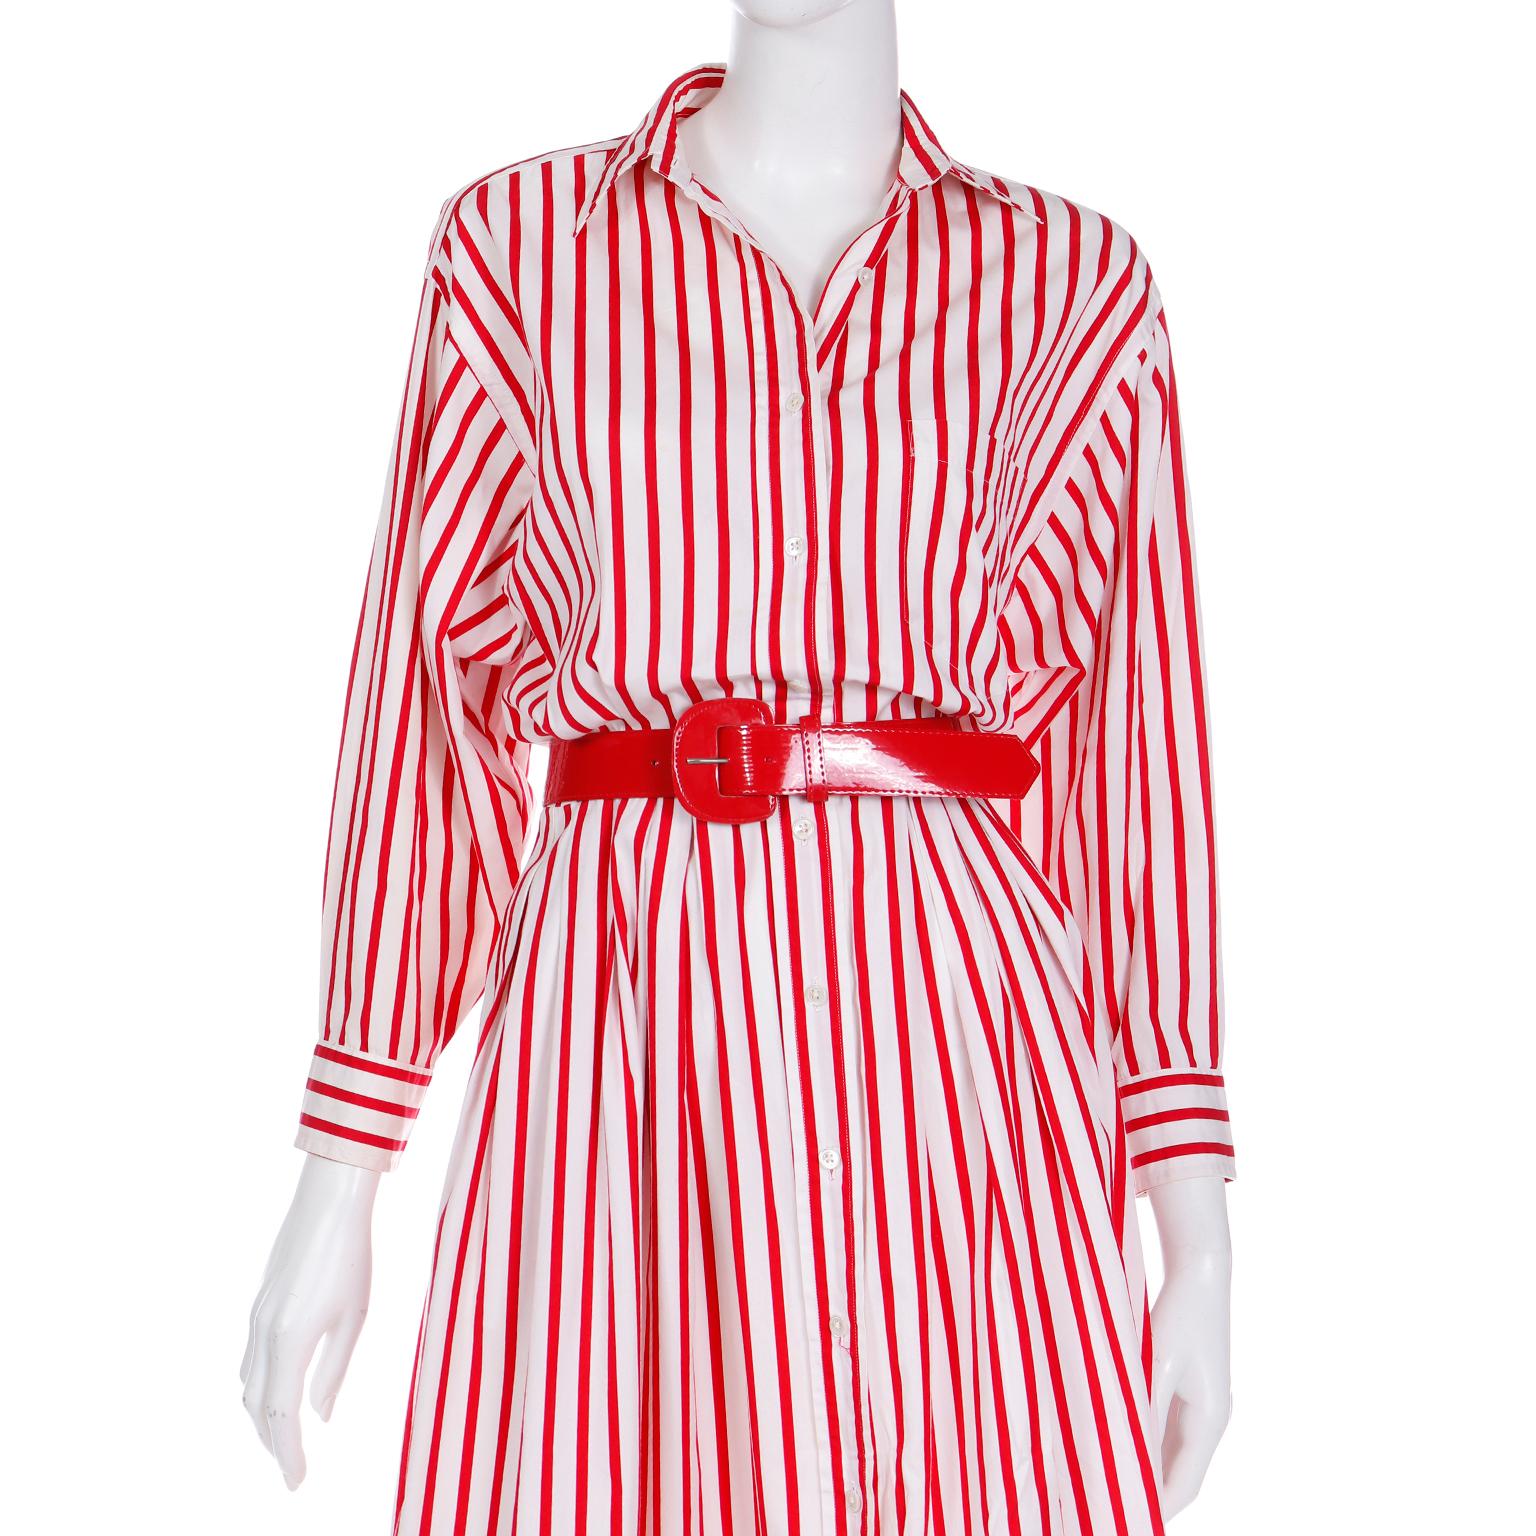 Vintage Ralph Lauren Red & White Striped Shirtdress Style Cotton Day Dress For Sale 2